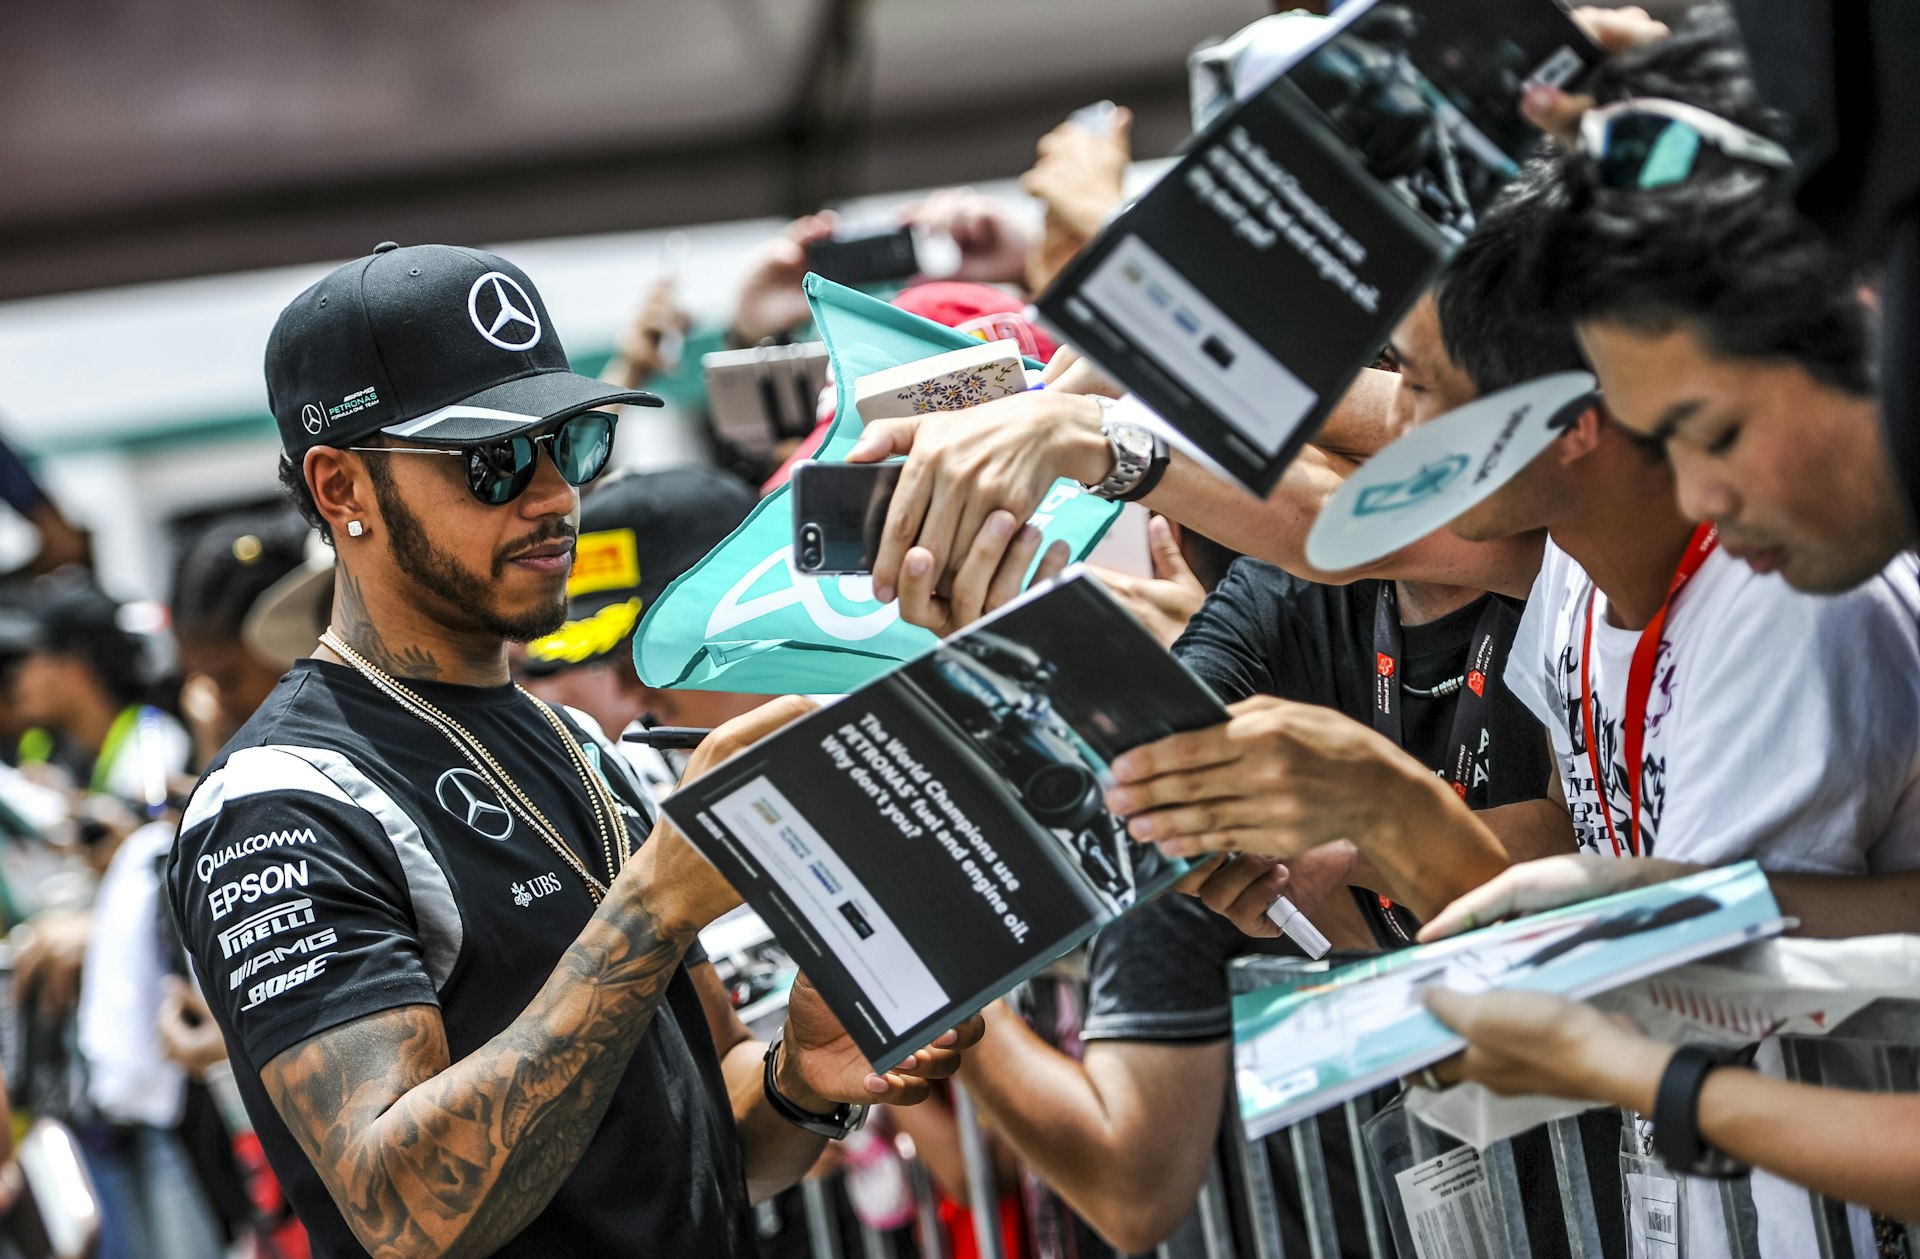 A racing-car driver signs programs held out by fans in a crowd